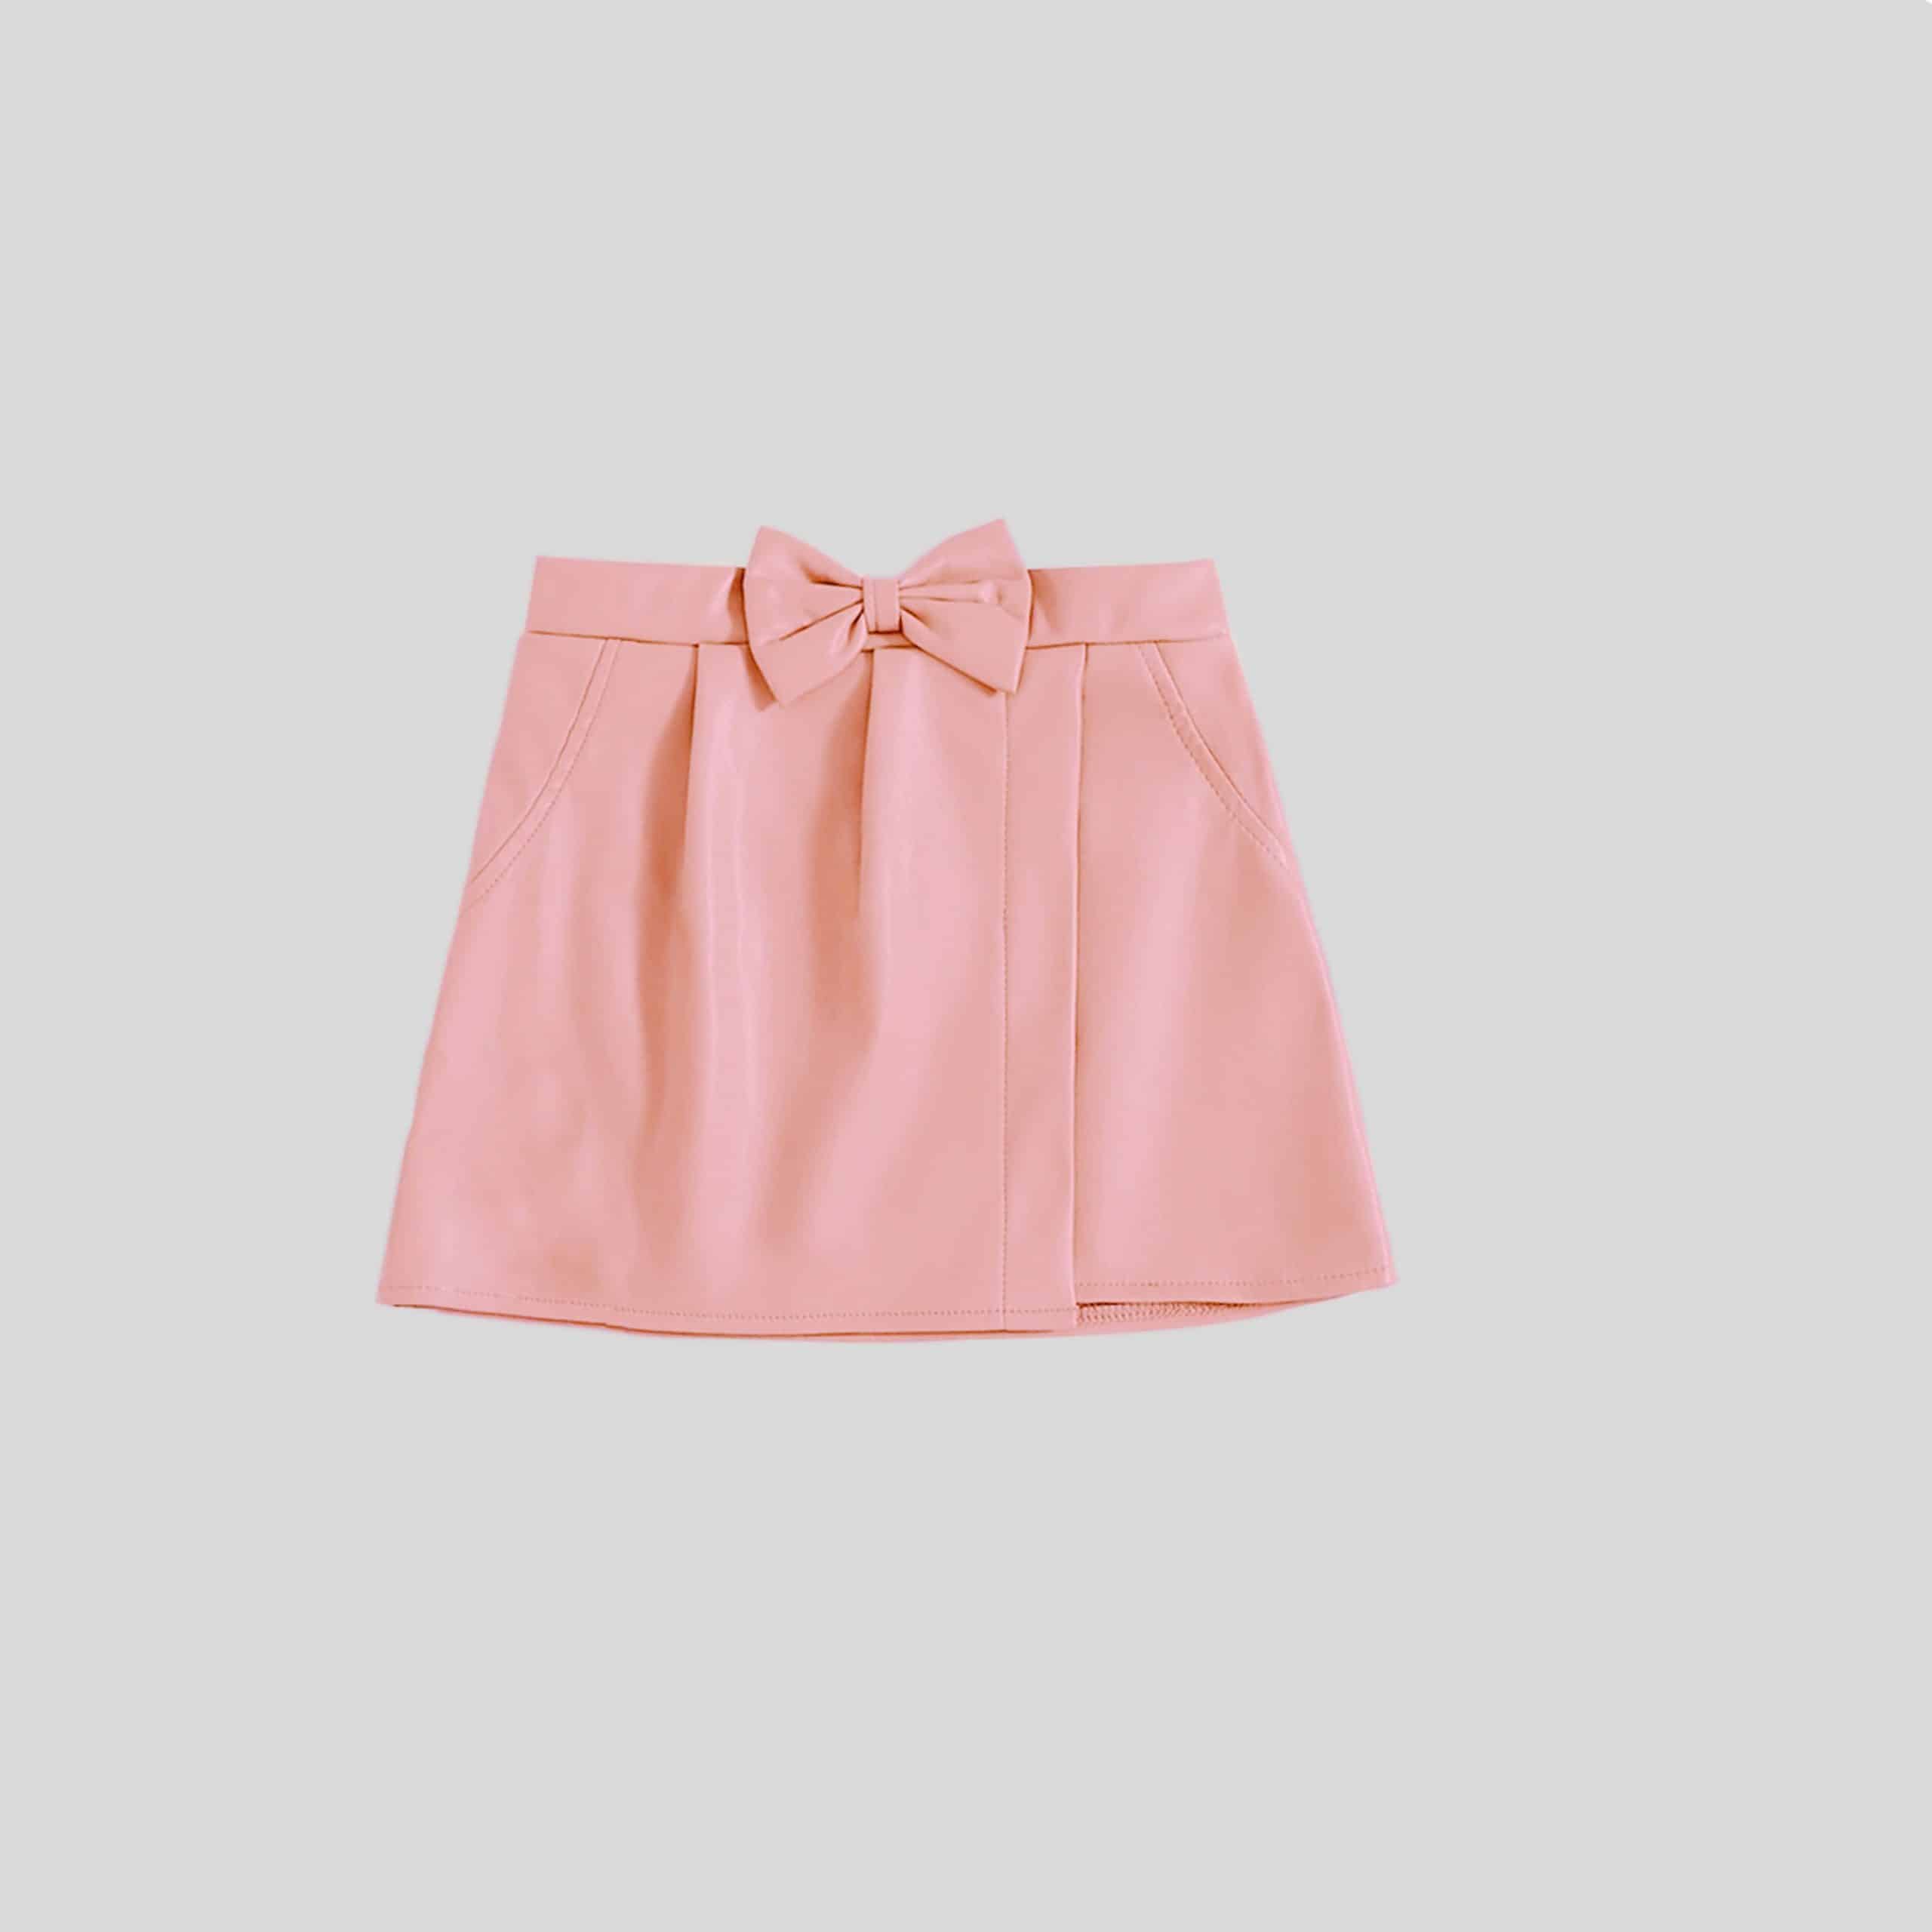 Girls baby pink bow Front  Skirt - RKFCW169